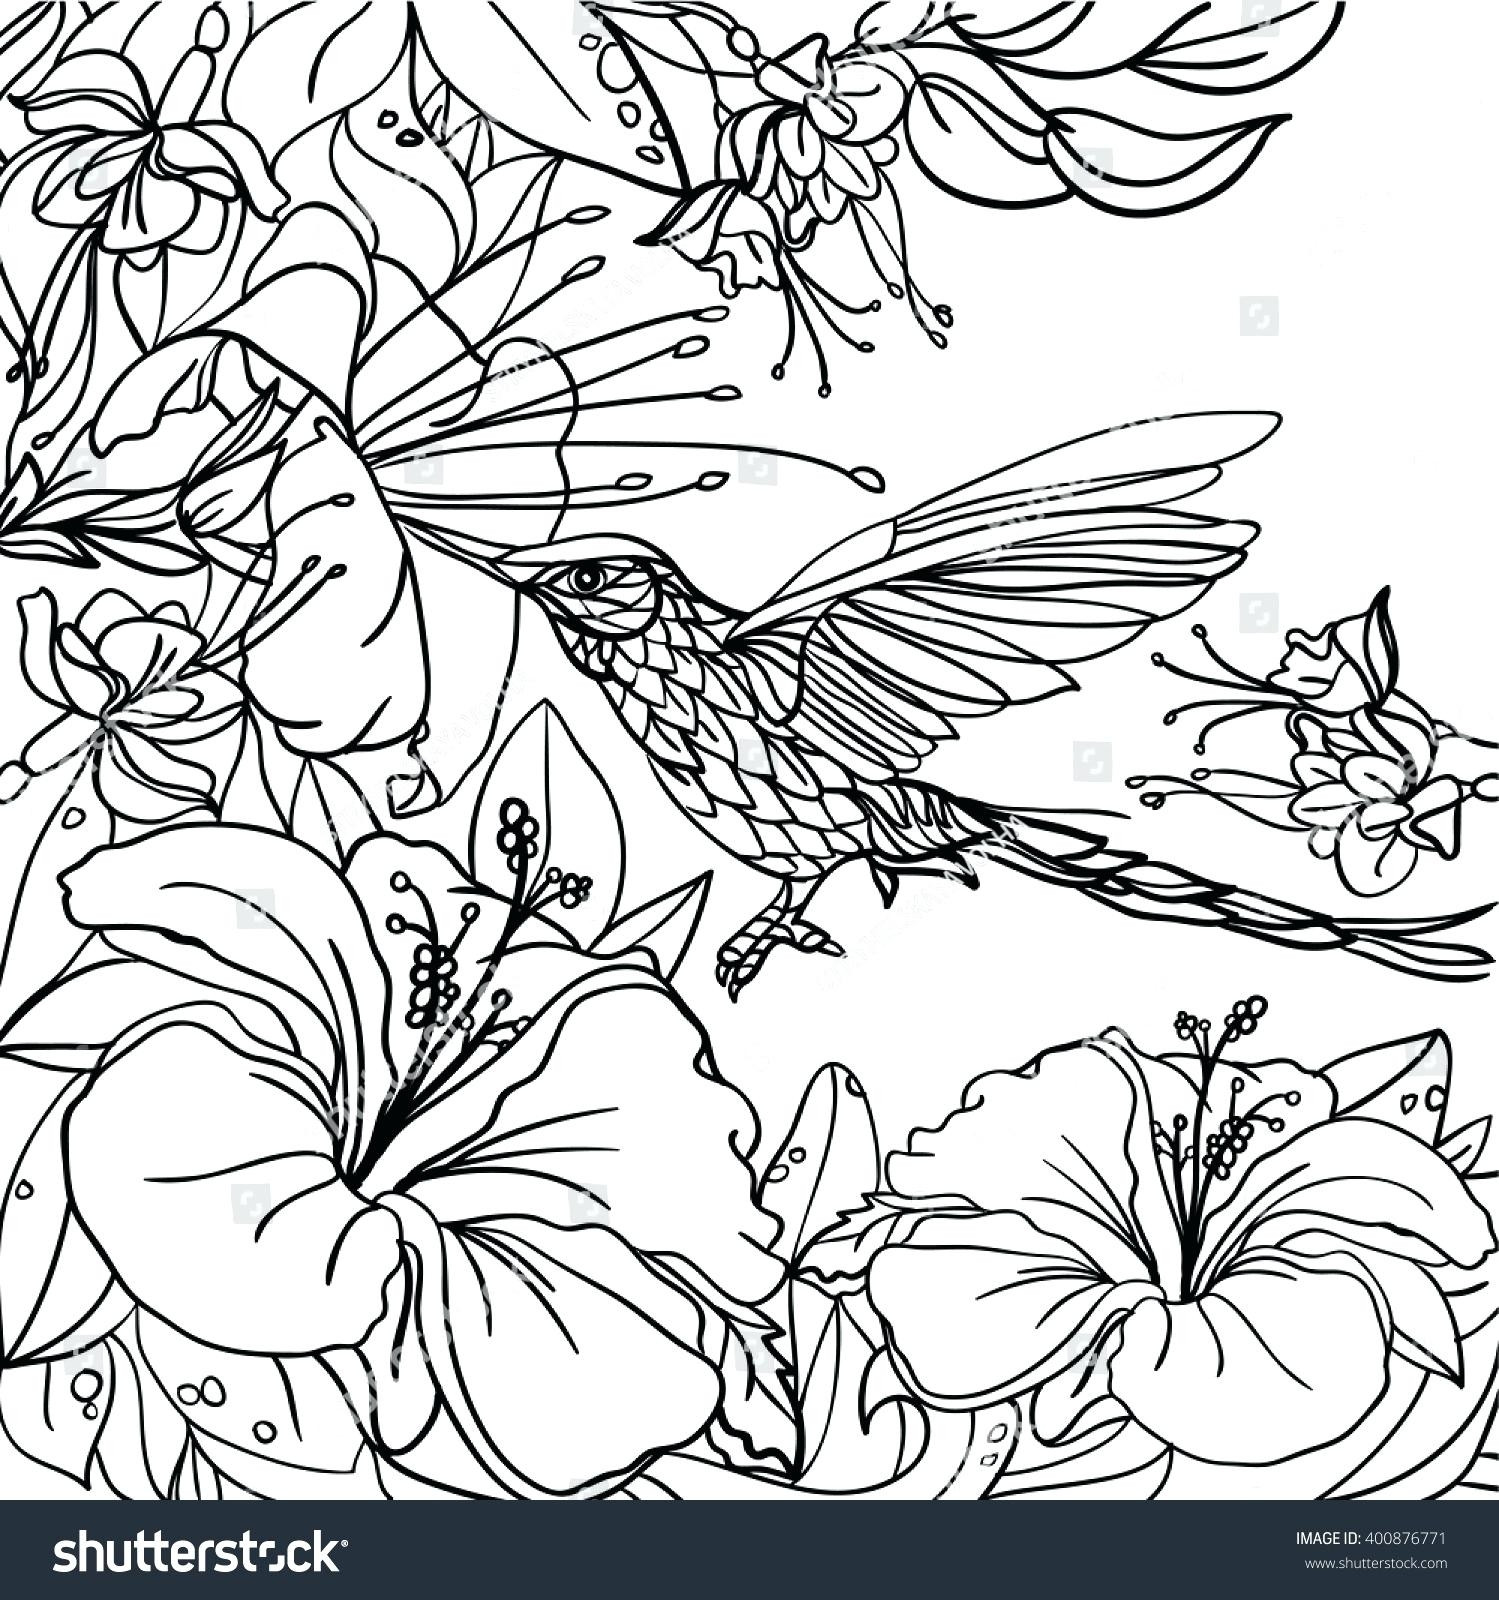 Tropical Coloring Book Pages
 Tropical Flower Coloring Pages to Print